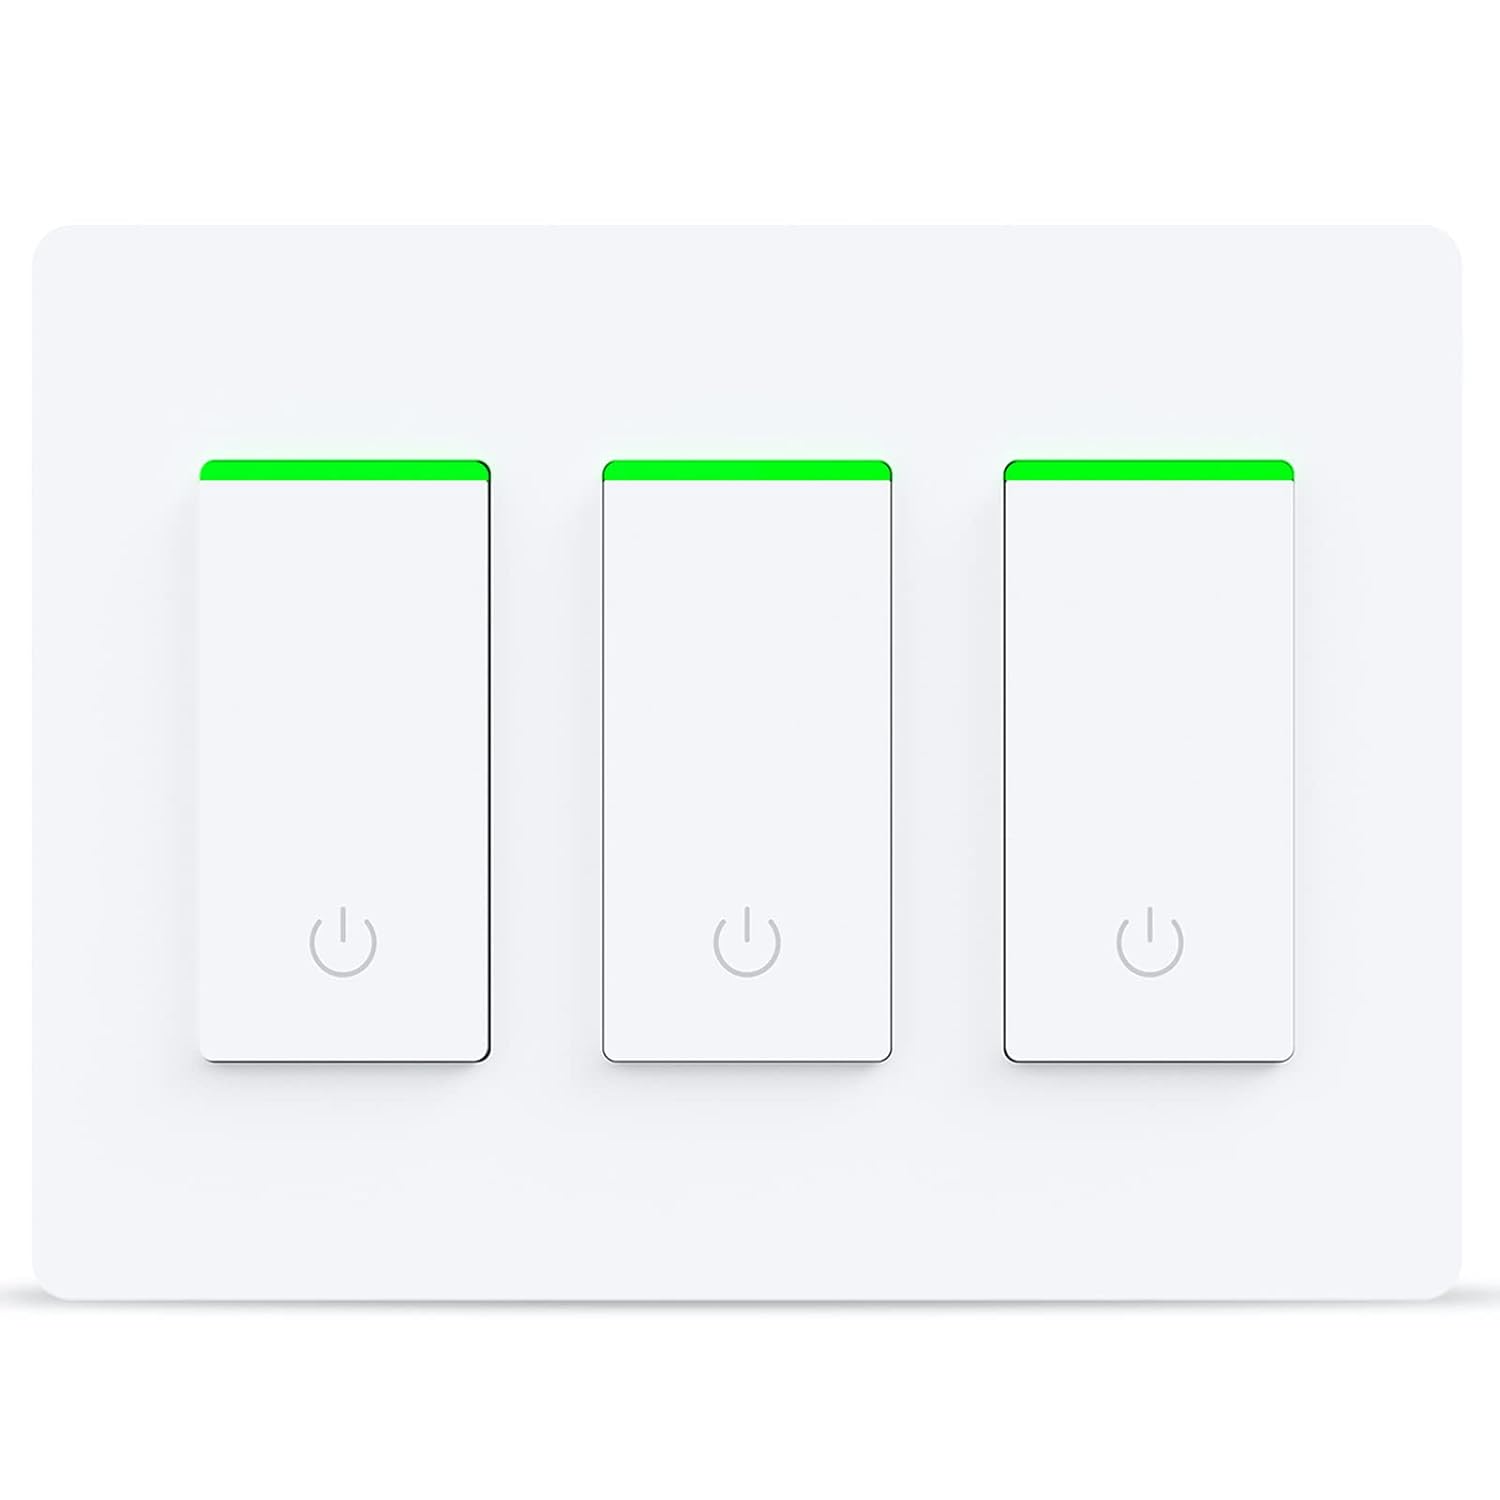 Smart Light Switch 2 Gang WiFi Smart Light Double Switch Work with Alexa, Google Assistant,Wireless Control, 2.4G WiFi Smart Light Switch, Single-Pole, Neutral Wire Required